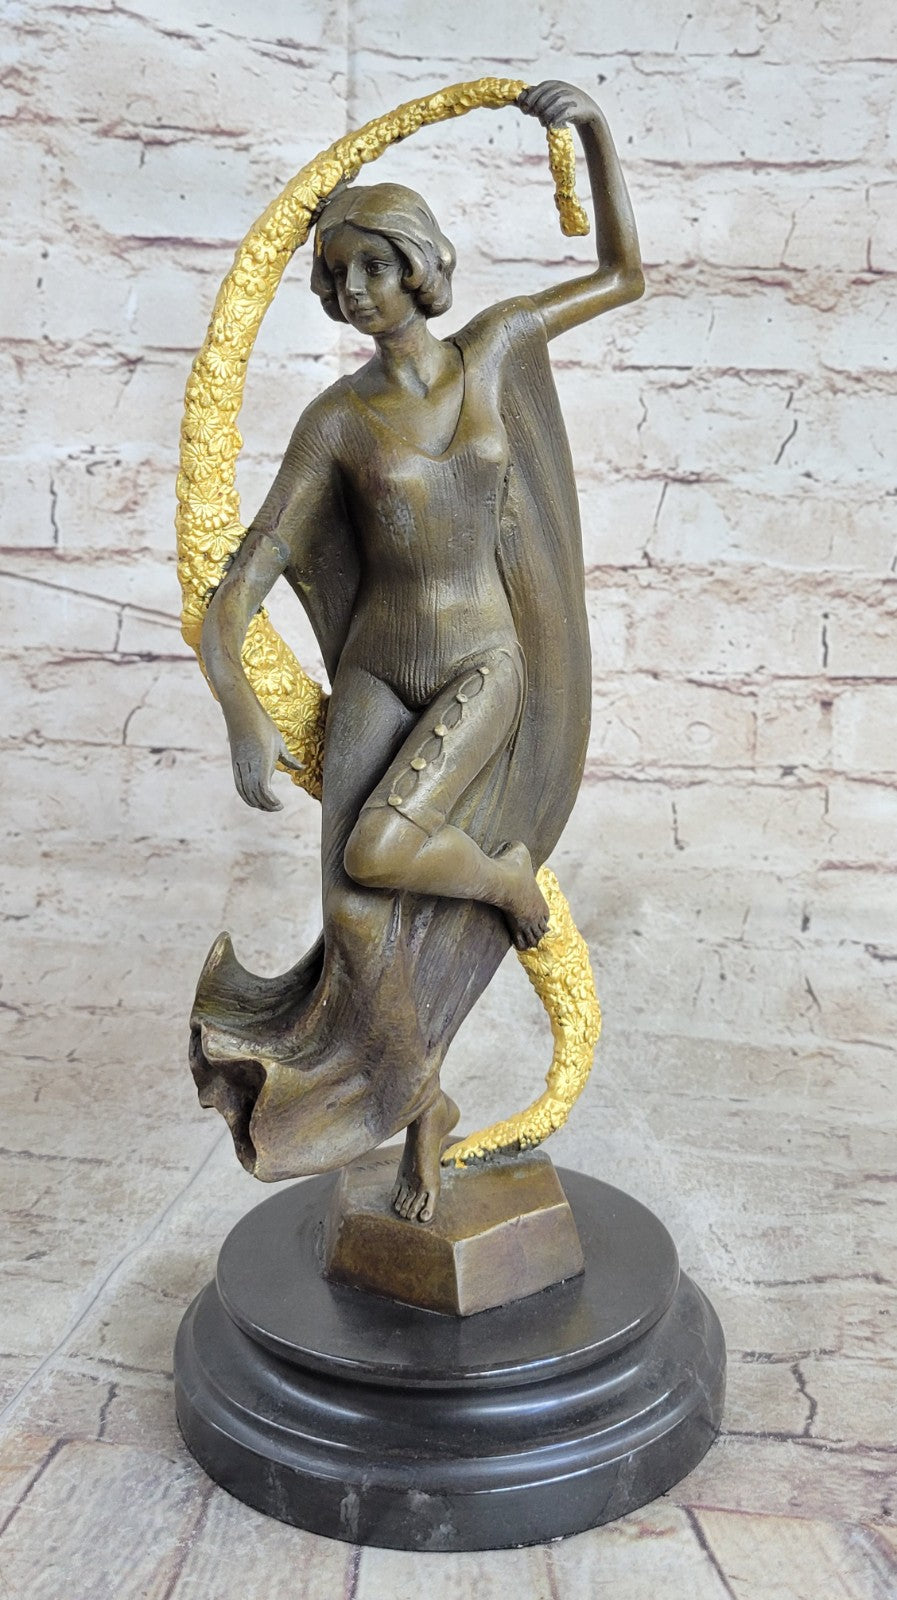 Museum Quality Classic Art Deco Lady 100% Real Bronze Sculpture Made by Lost Wax